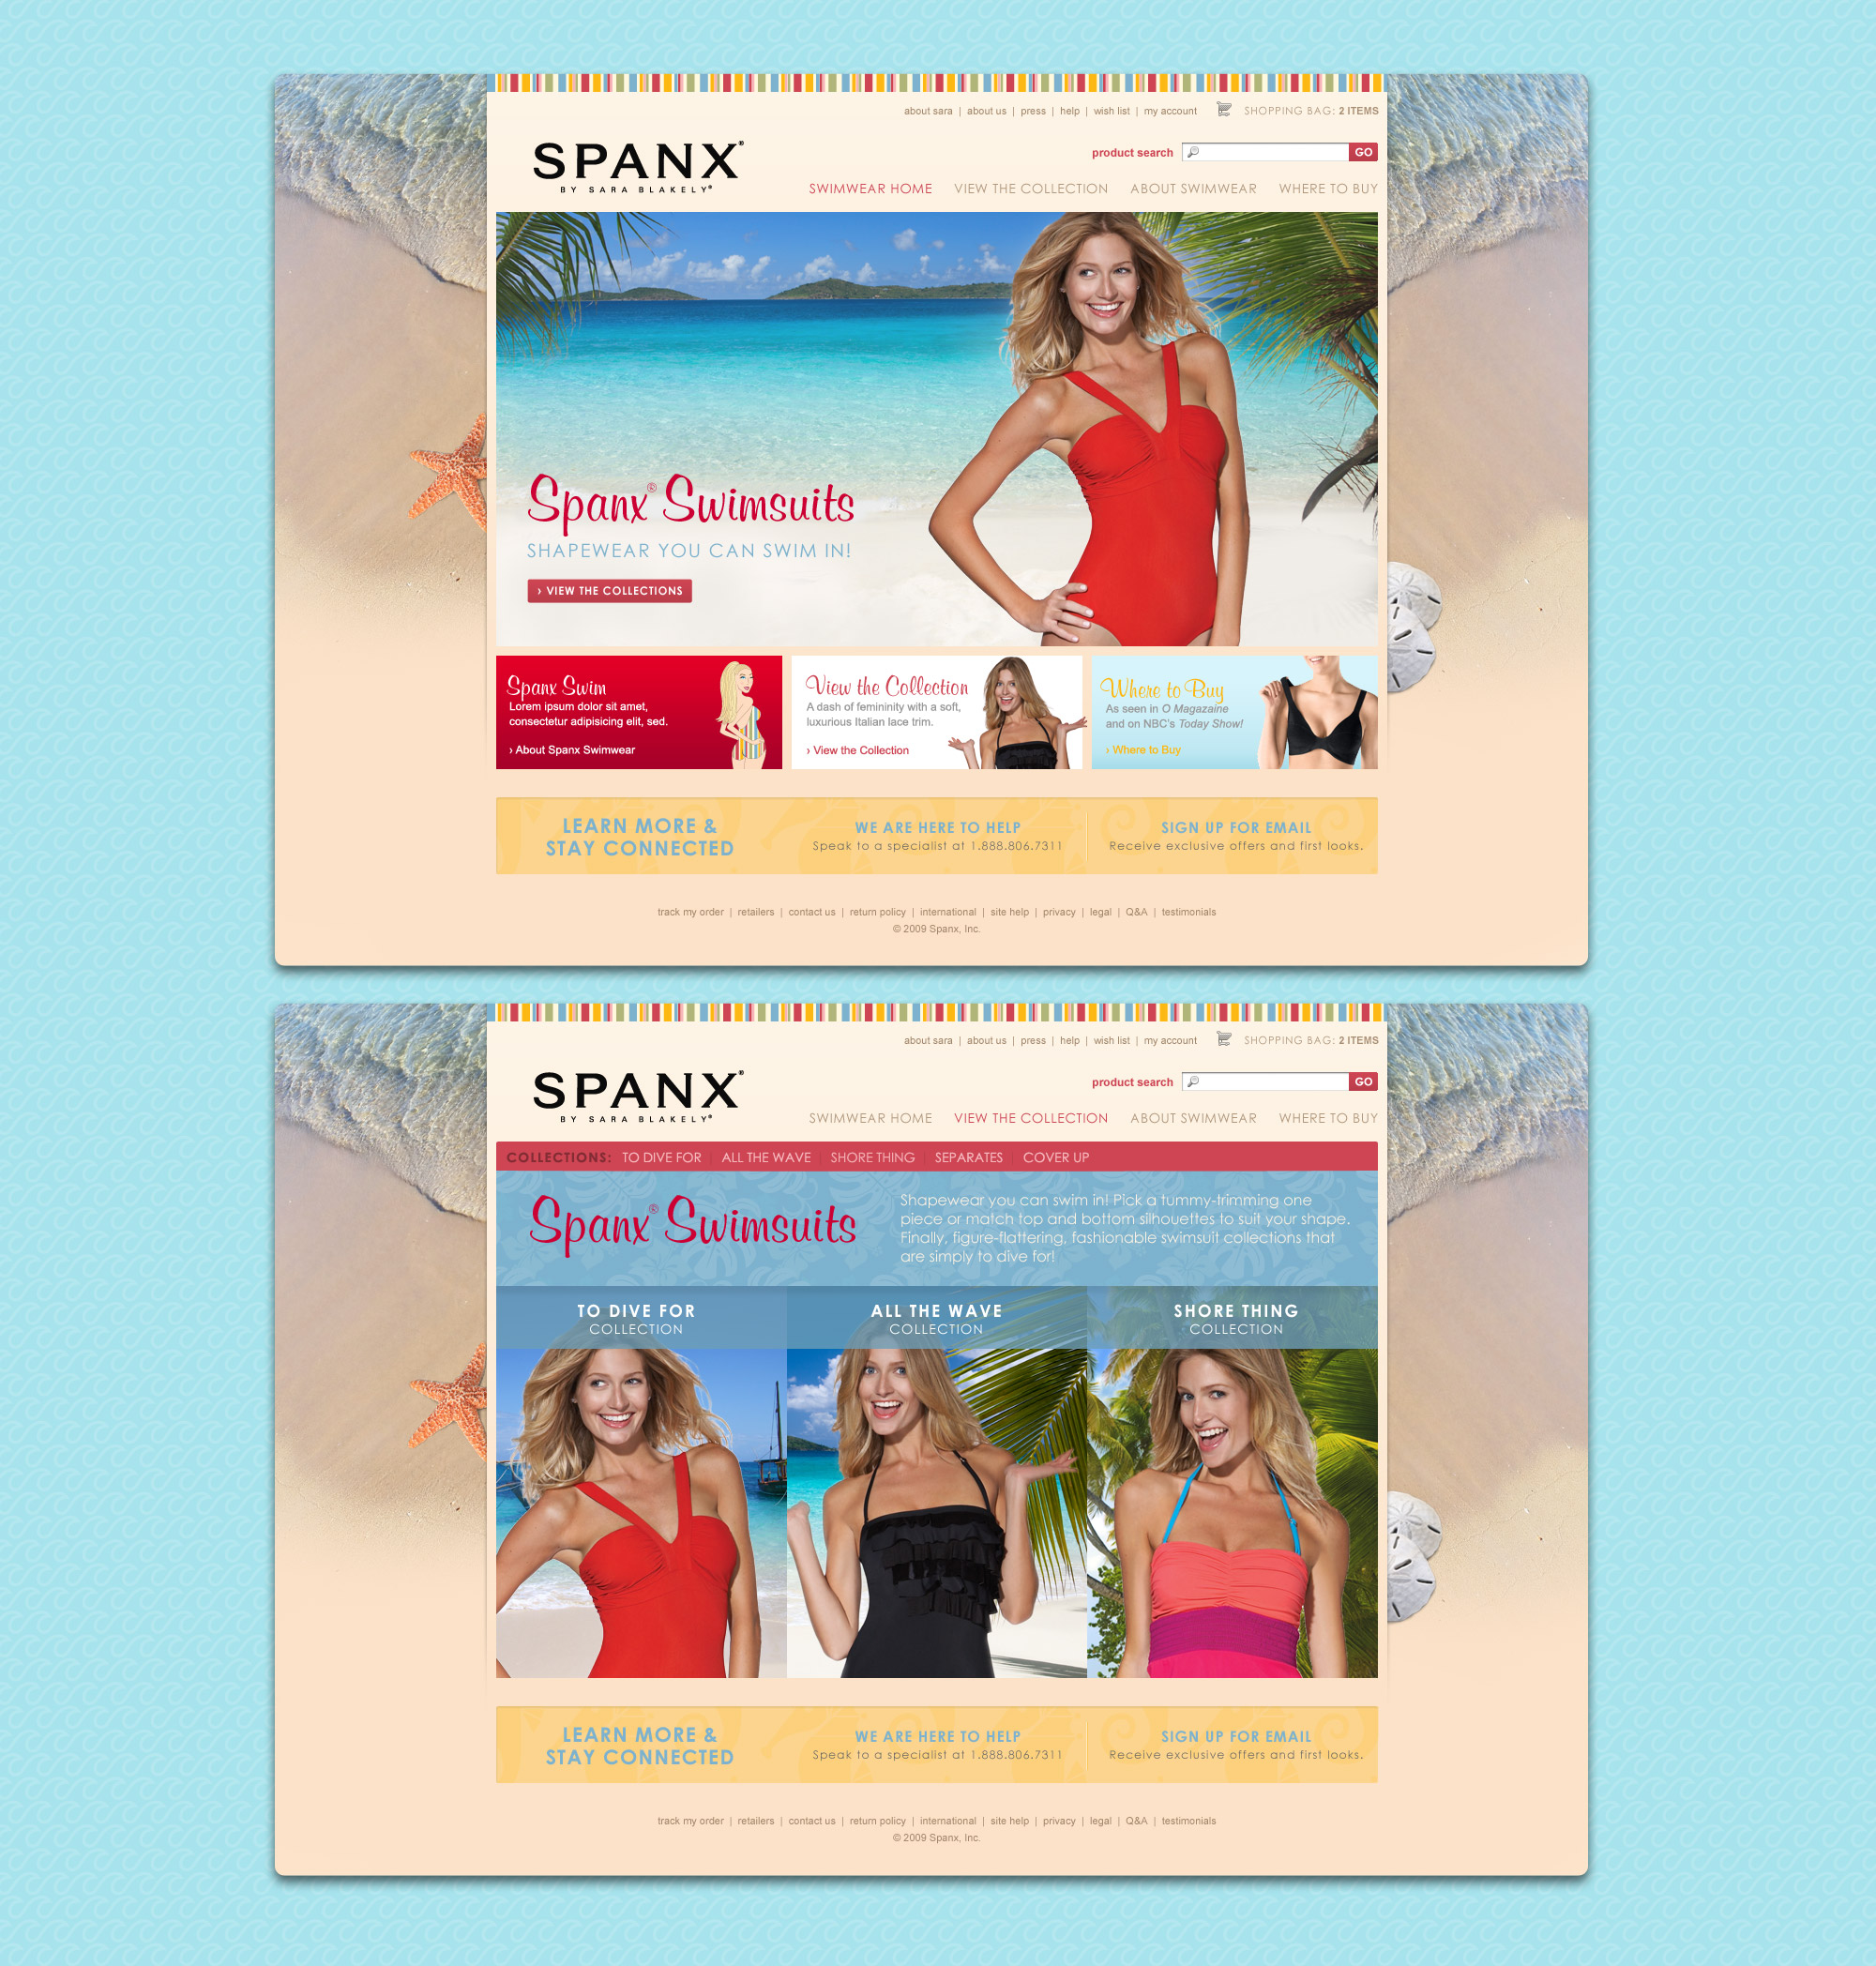 Spanx micro-site pages